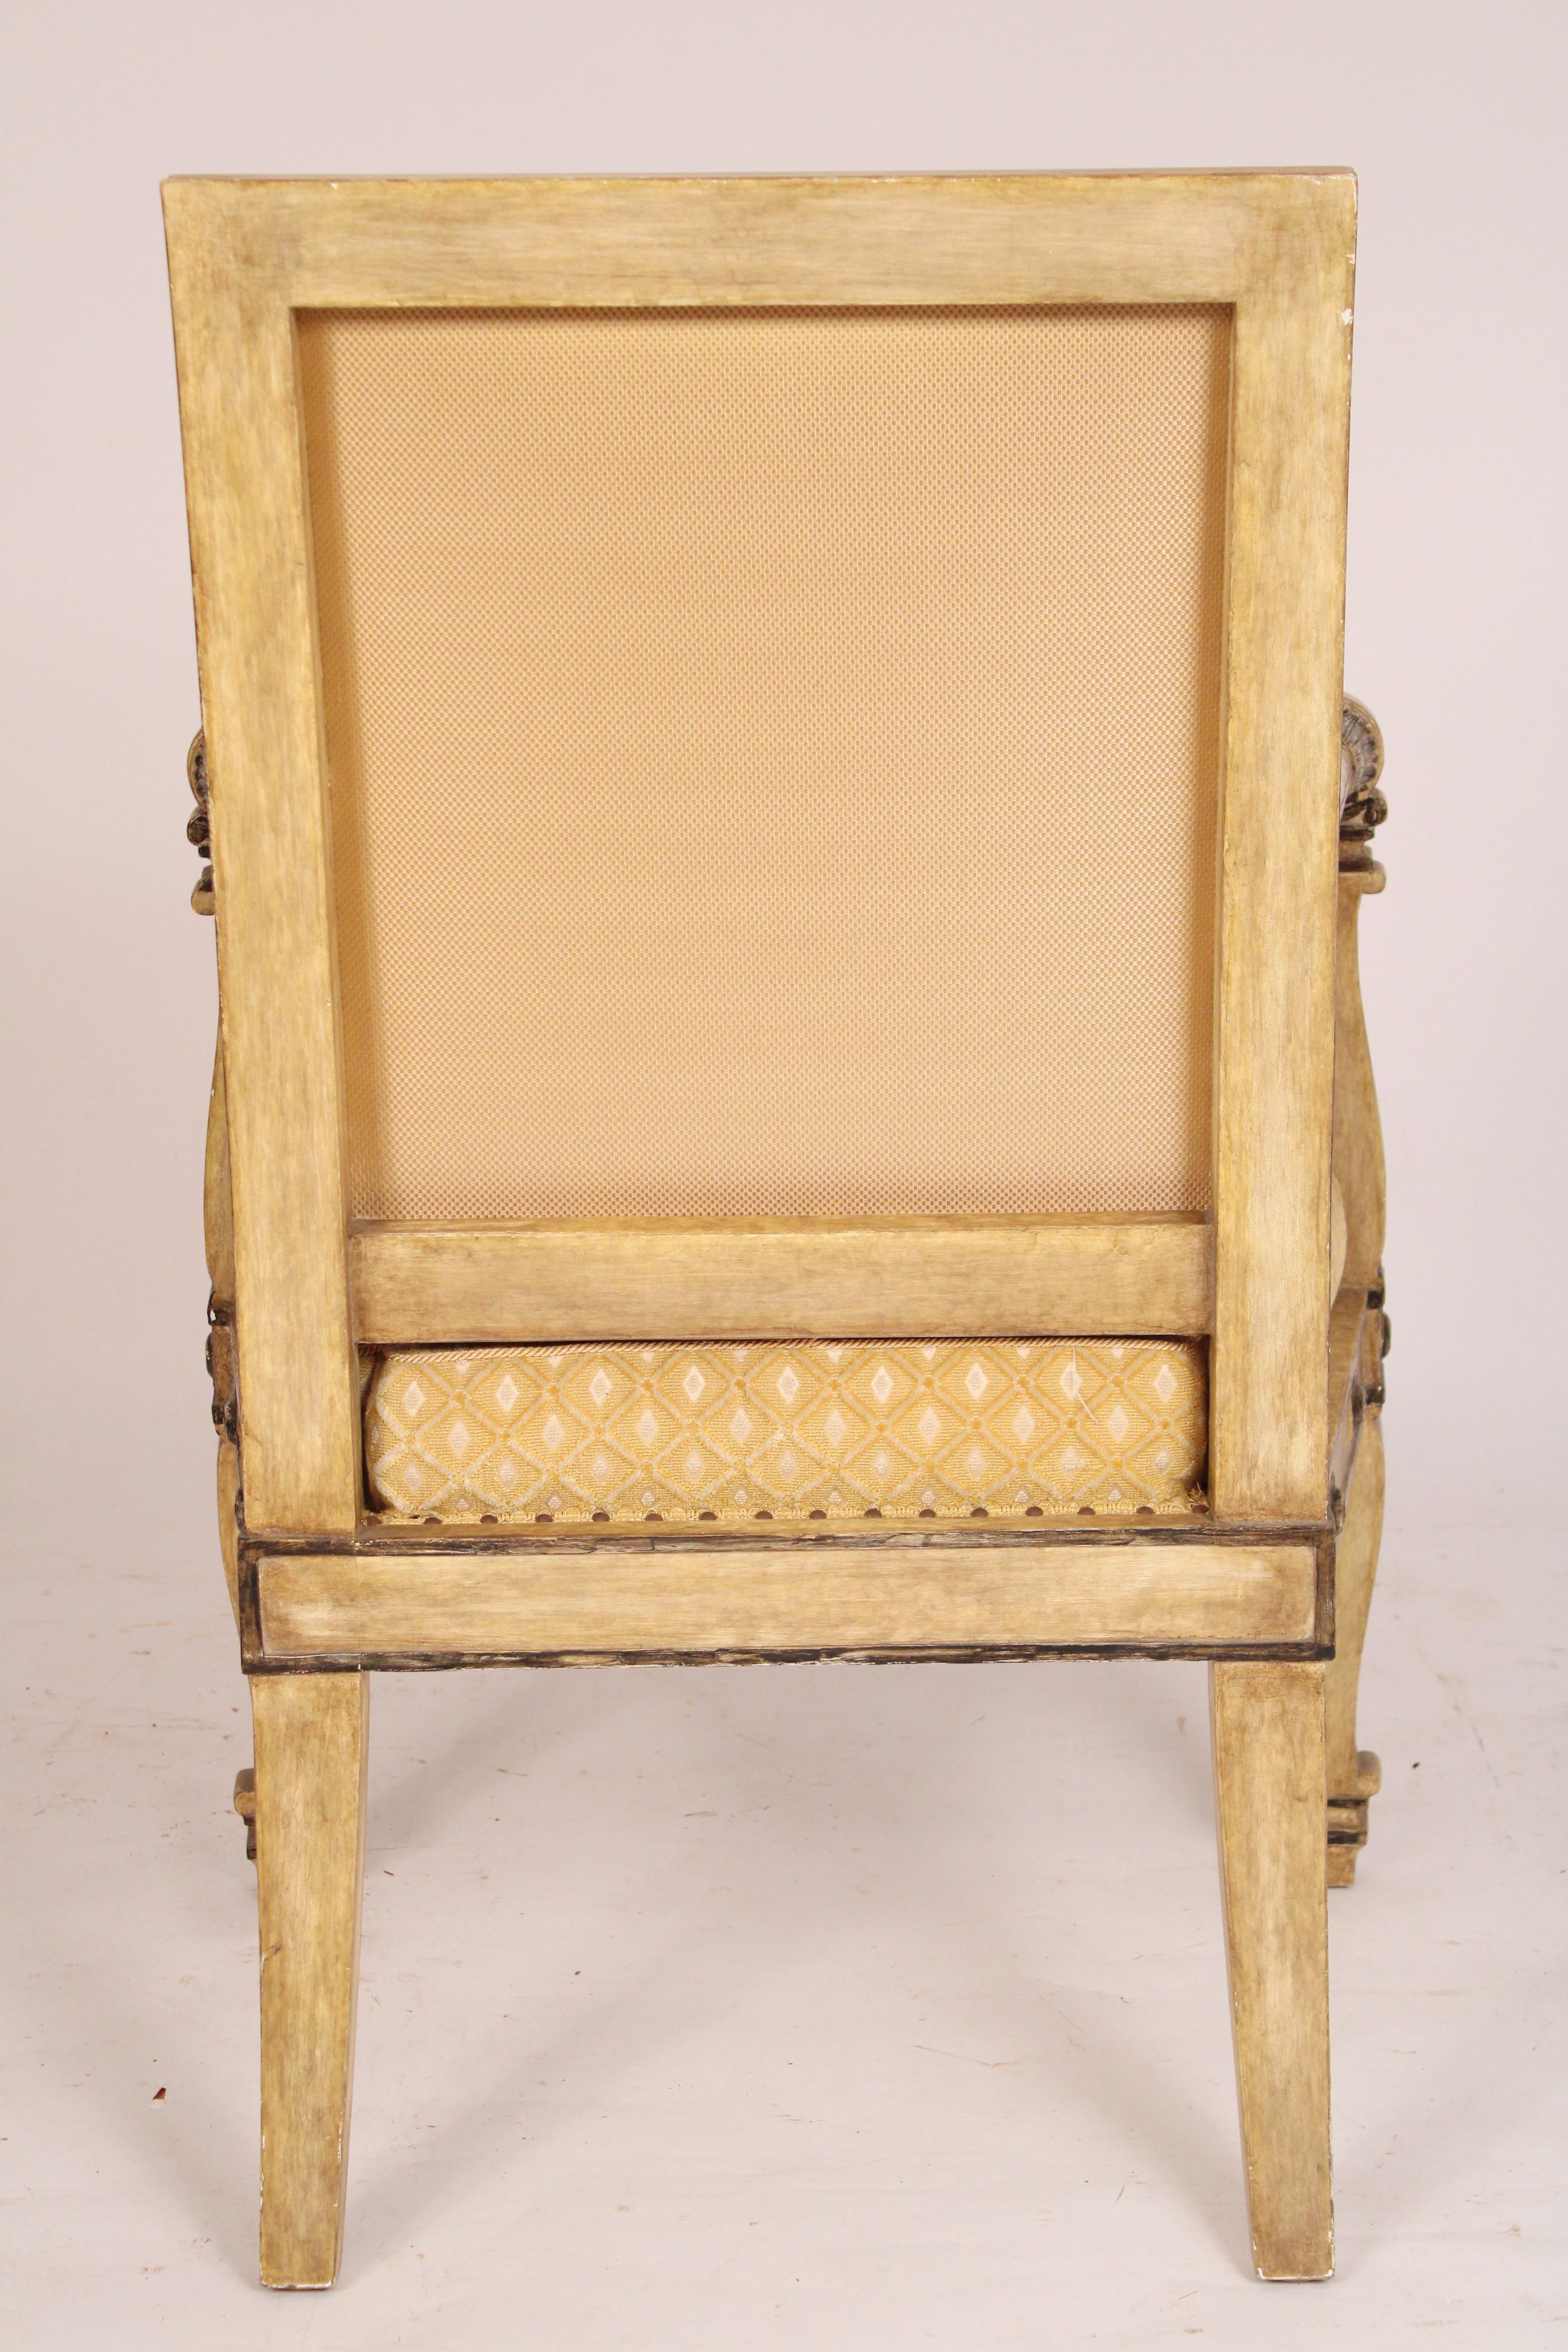 20th Century Henbdrix And Allardyce Painted Empire Style Armchair  For Sale